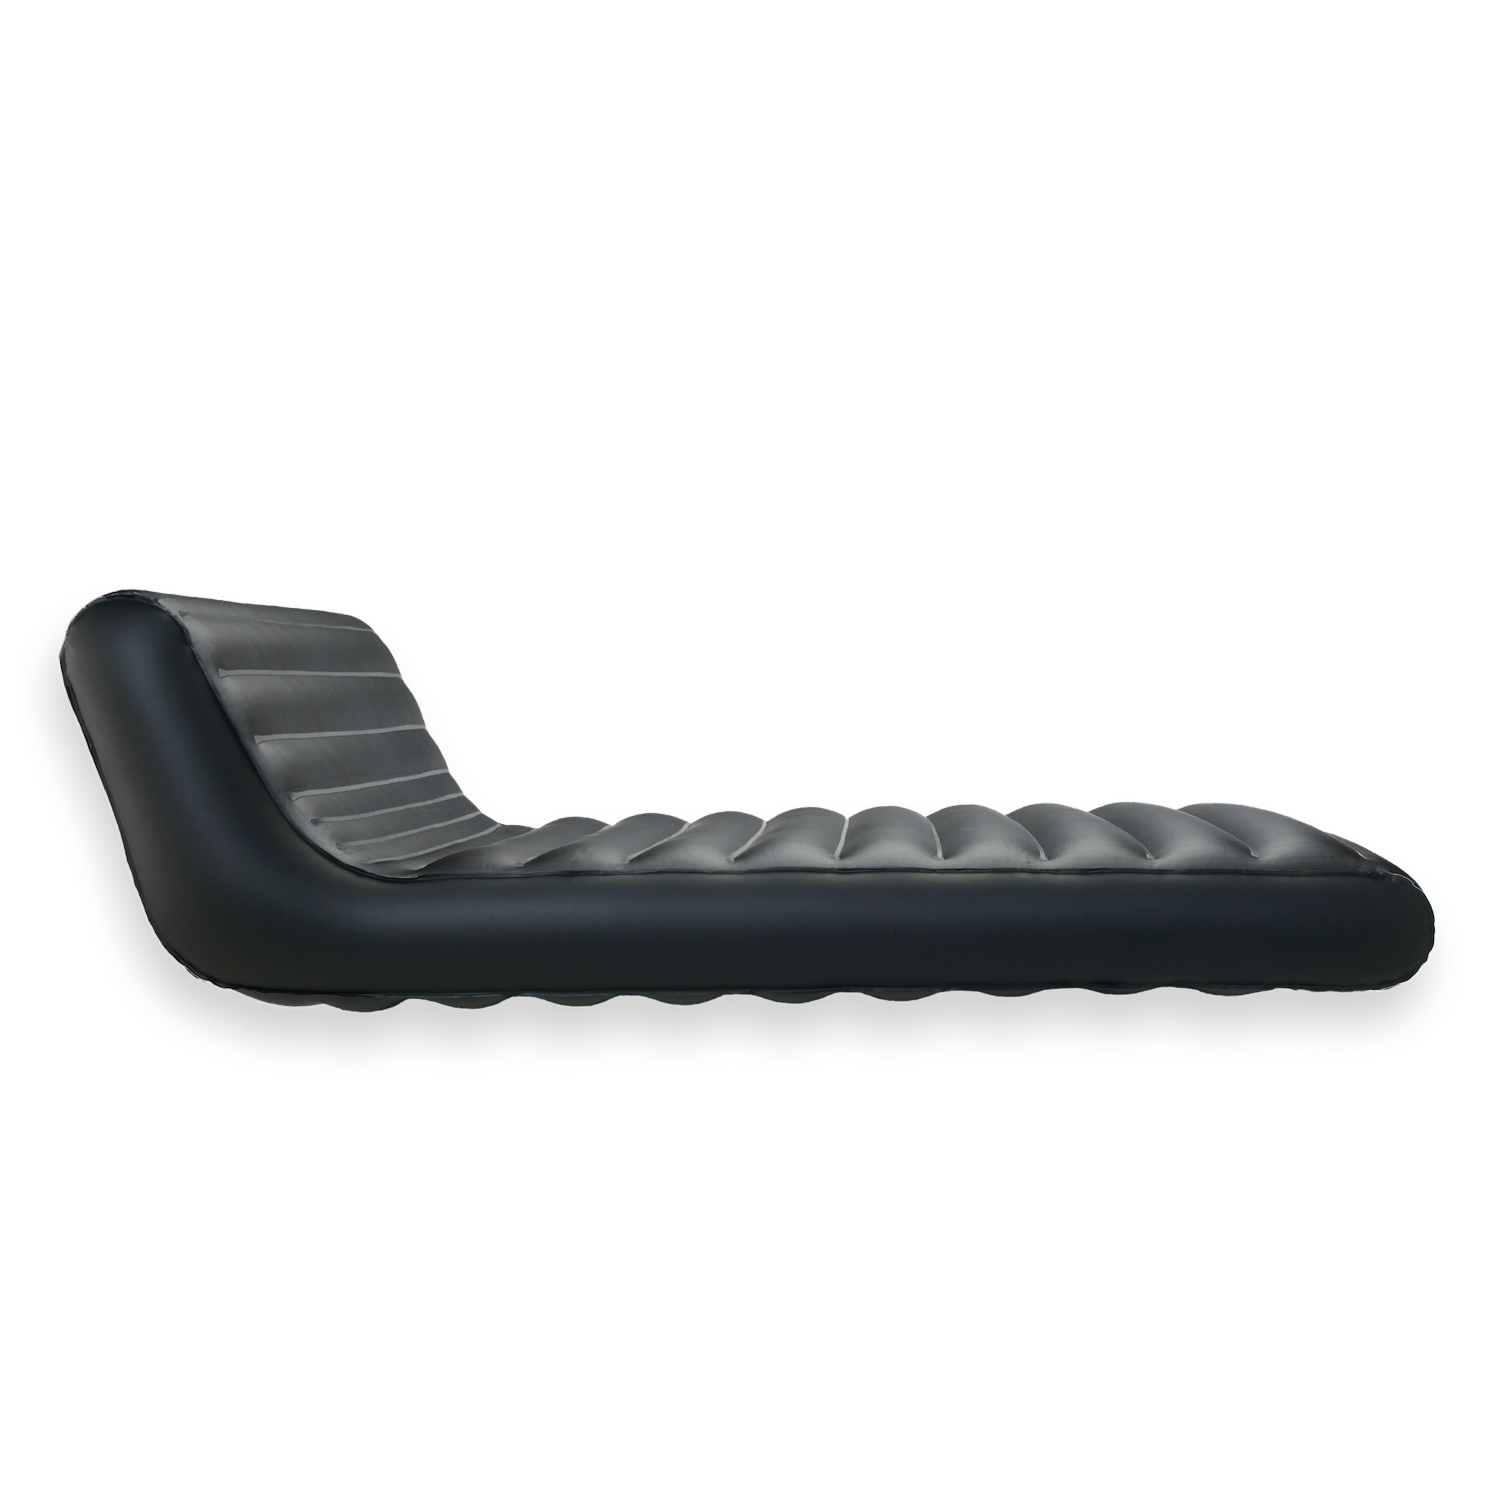 A side view of a single inflatable thermal polyurethane luxury single pool float.